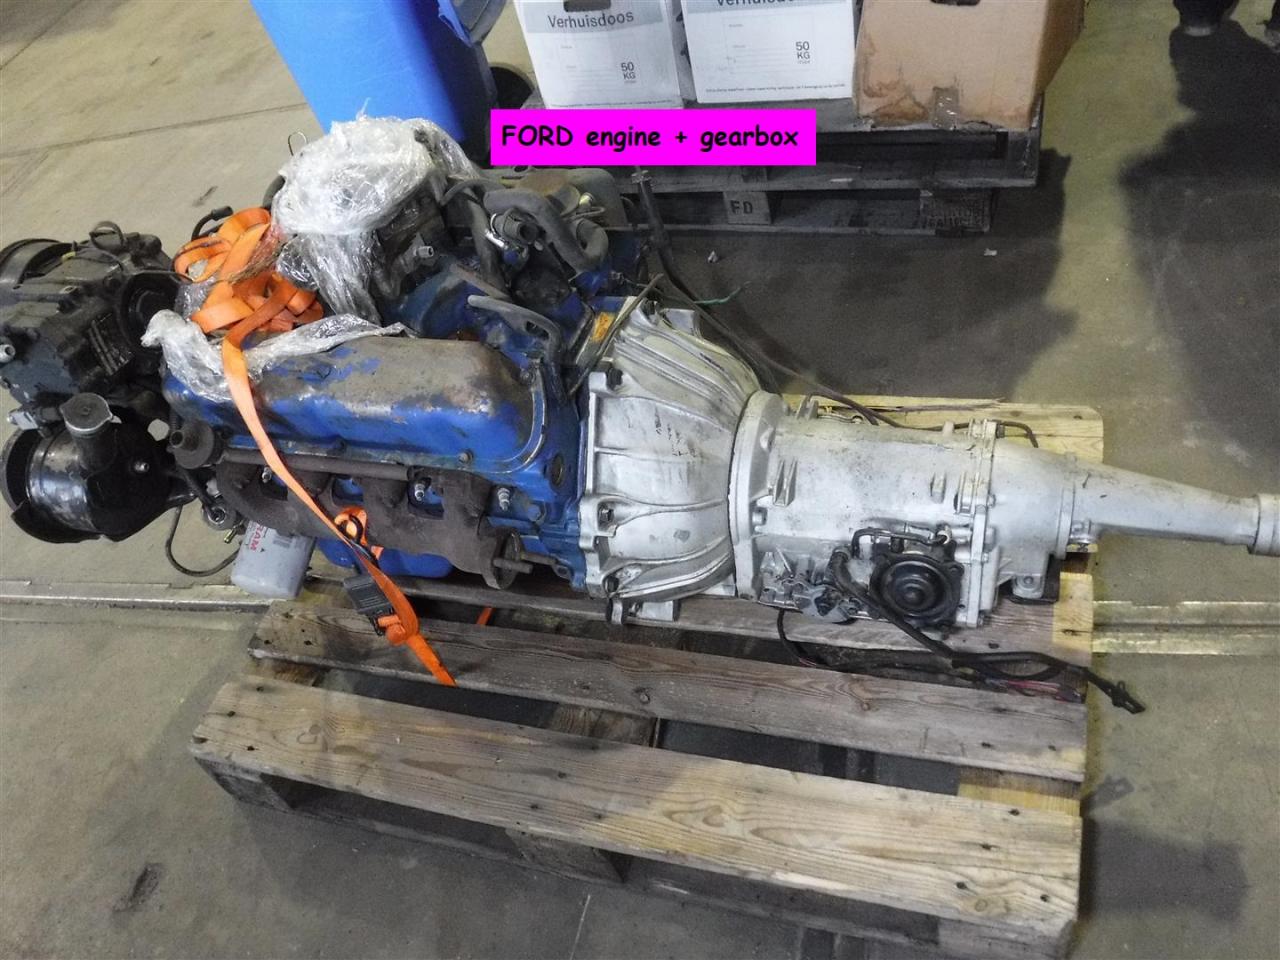 1900 Ford engines / parts engine plus gearbox